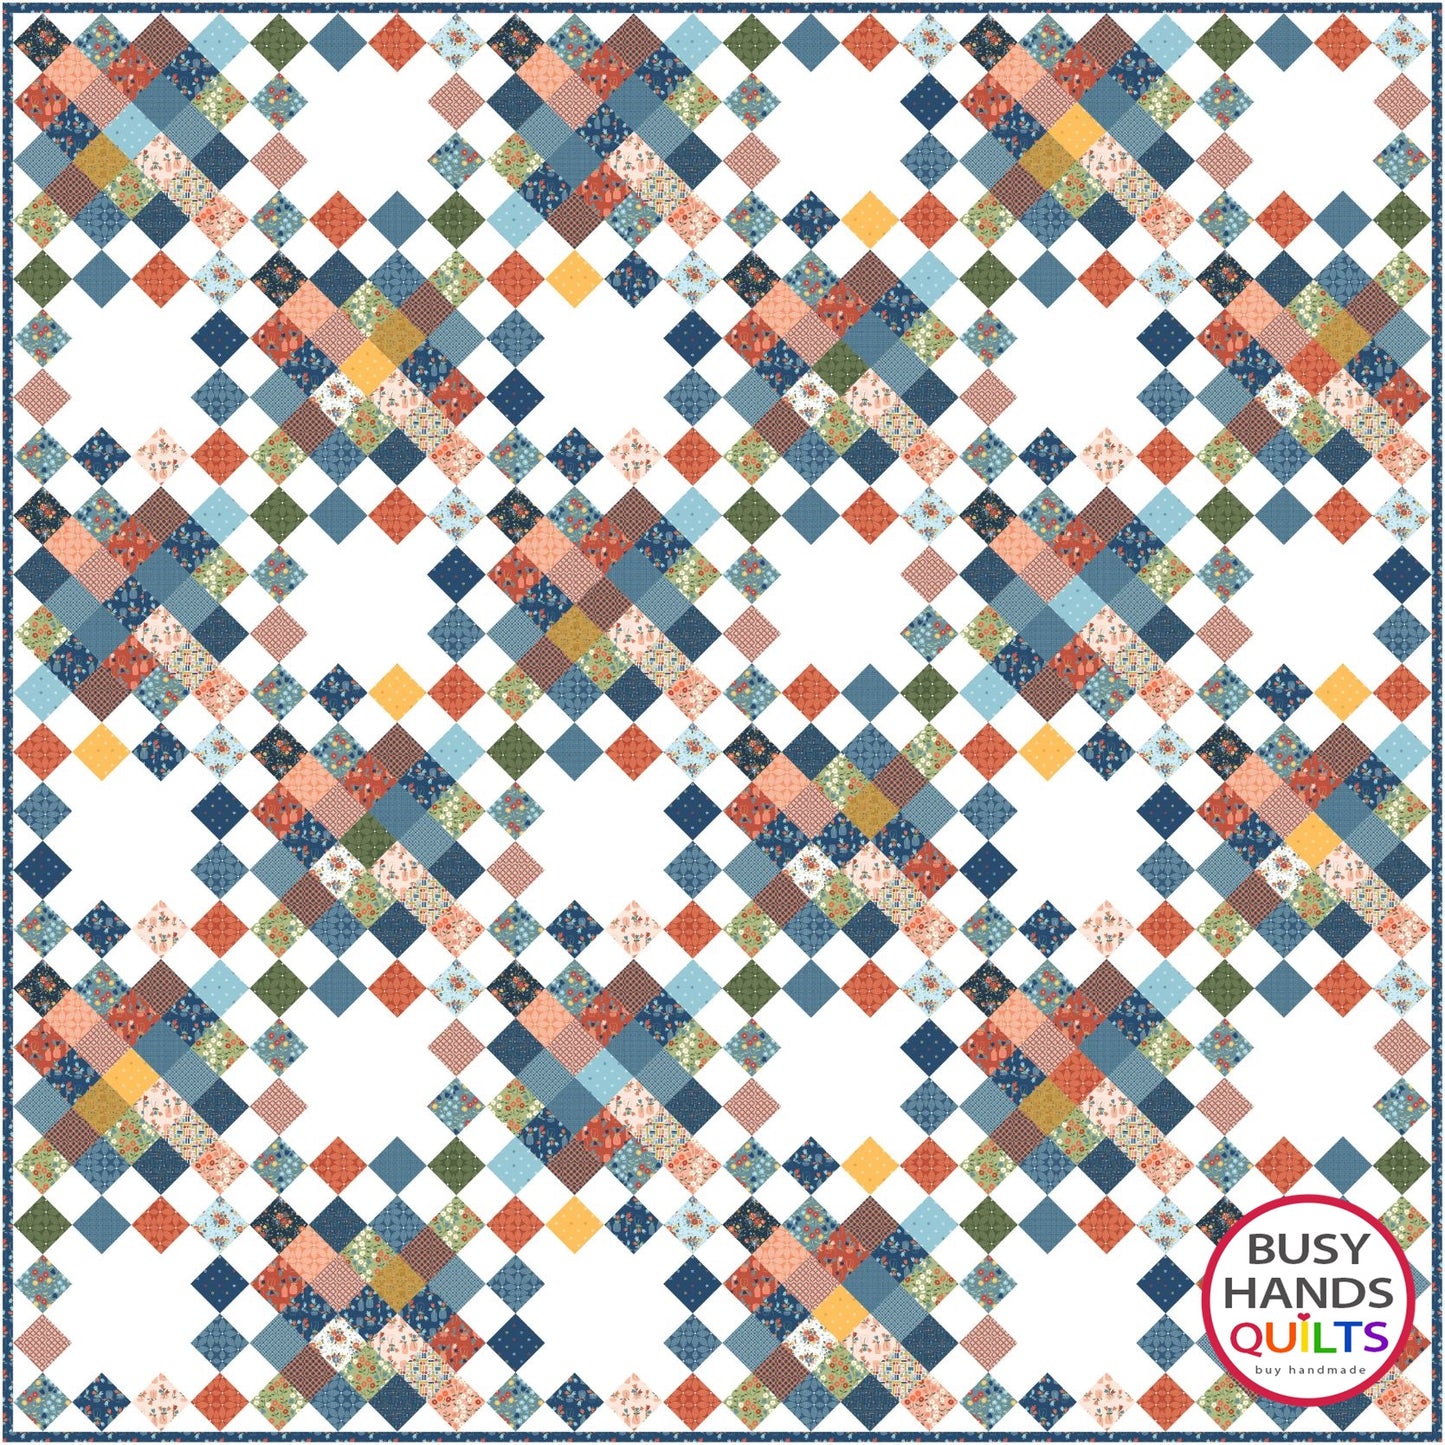 Picnic Plaid Quilt Kit in Forget Me Not with WHITE Background